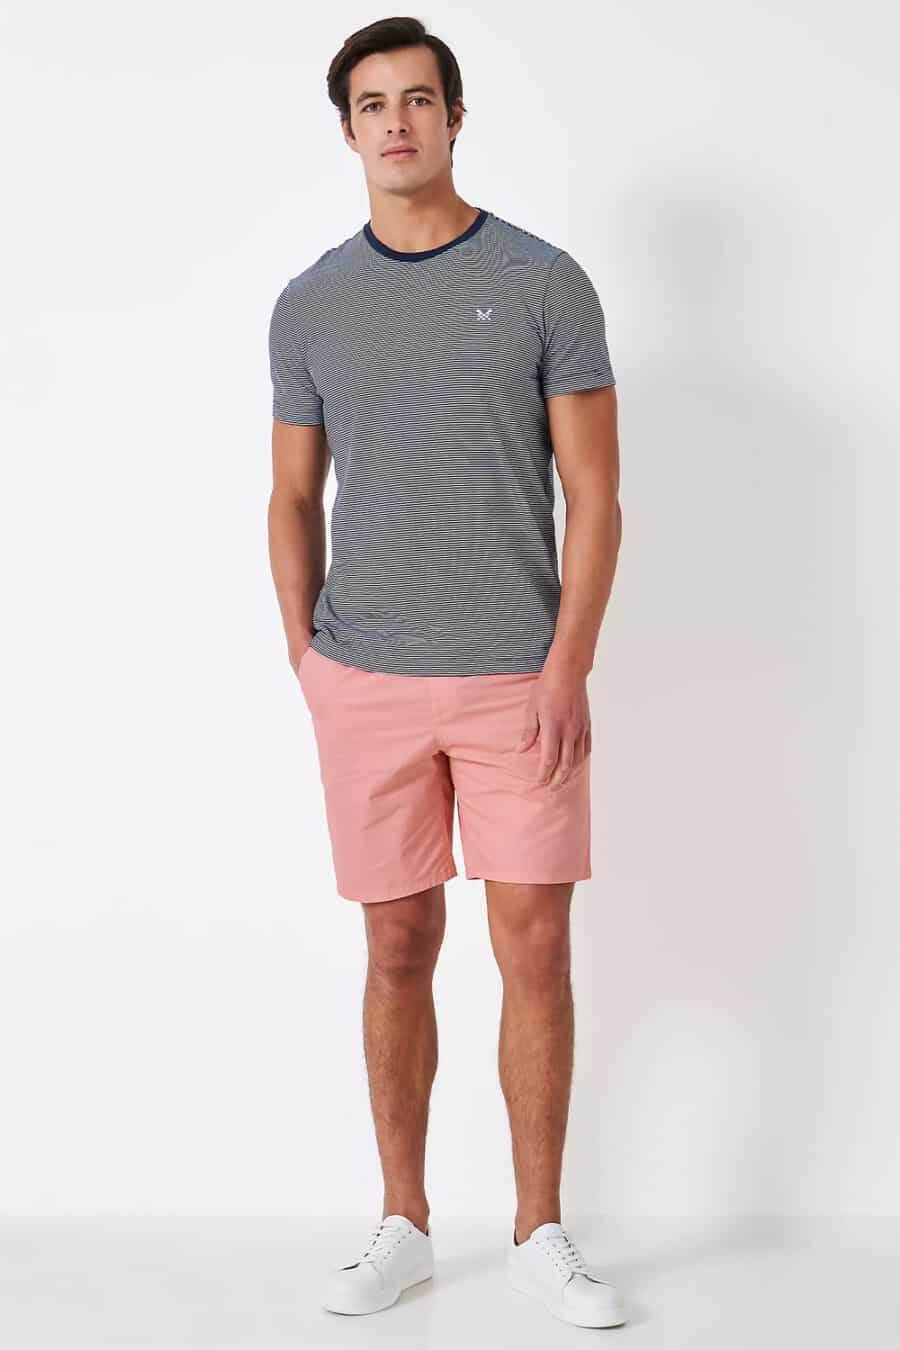 Men's pink shorts, navy/white fine striped T-shirt and white sneakers outfit